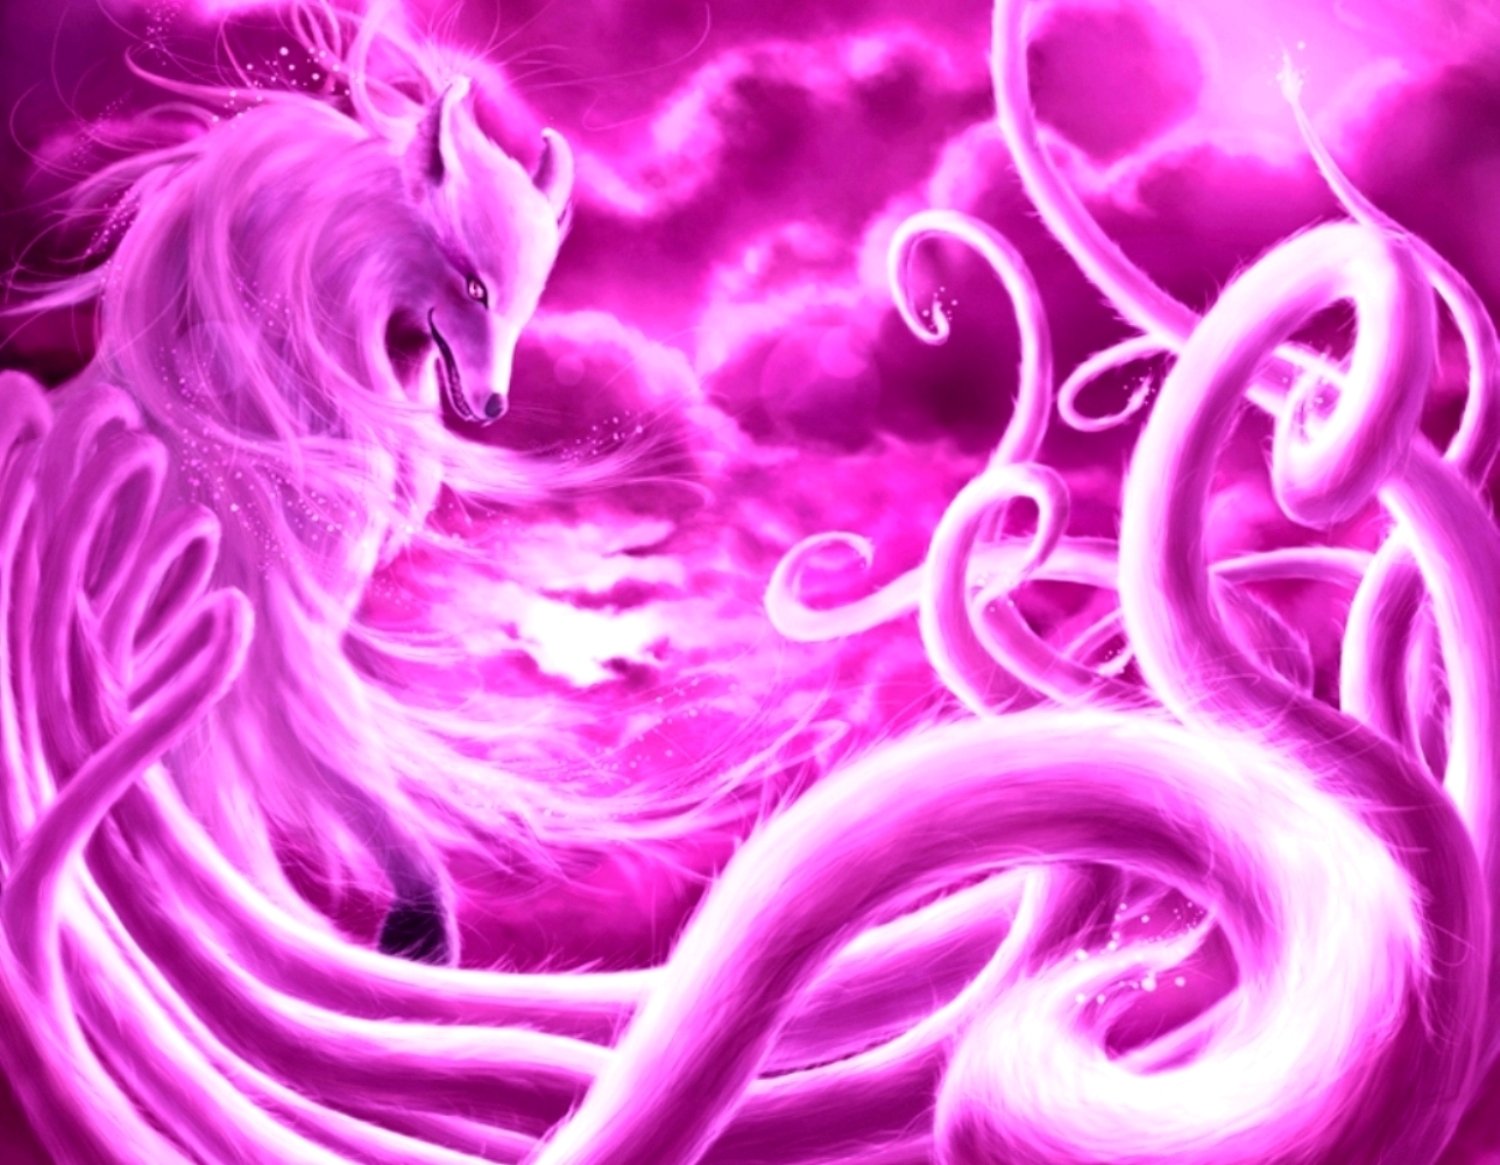 Nine Tails Mythical Creature - HD Wallpaper 